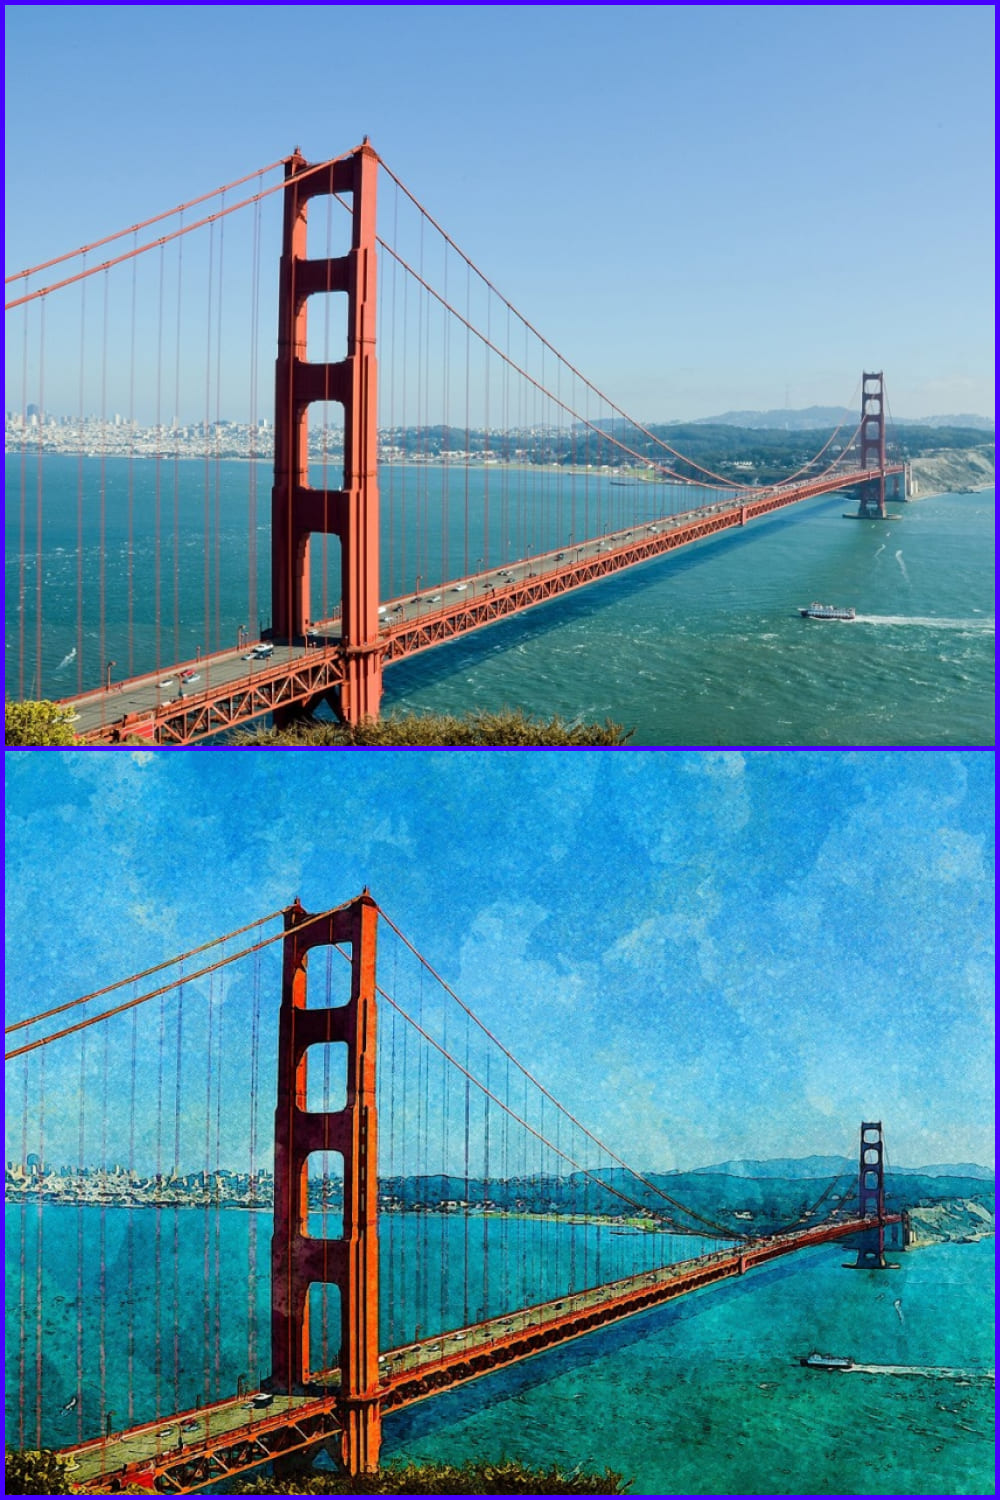 A collage of two photographs of the Golden Gate Bridge with a watercolor effect.